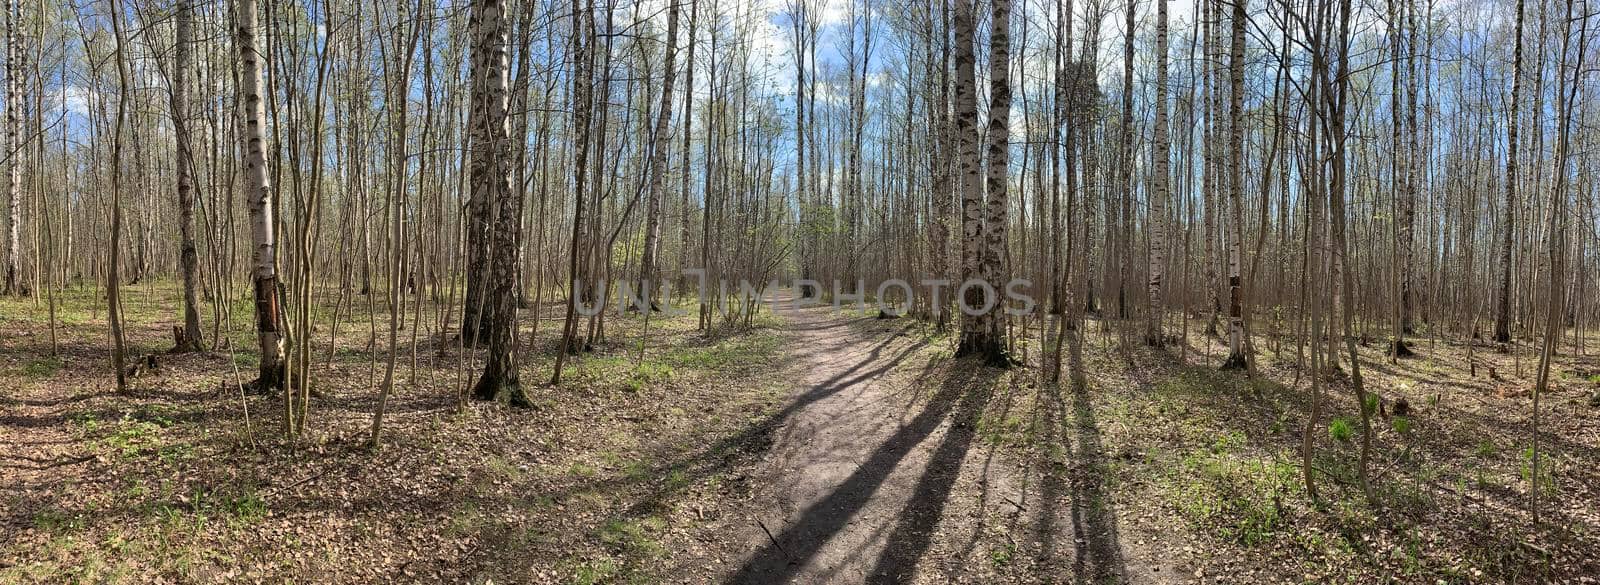 Panorama of first days of spring in a forest, long shadows, blue sky, Buds of trees, Trunks of birches, sunny day, path in the woods by vladimirdrozdin